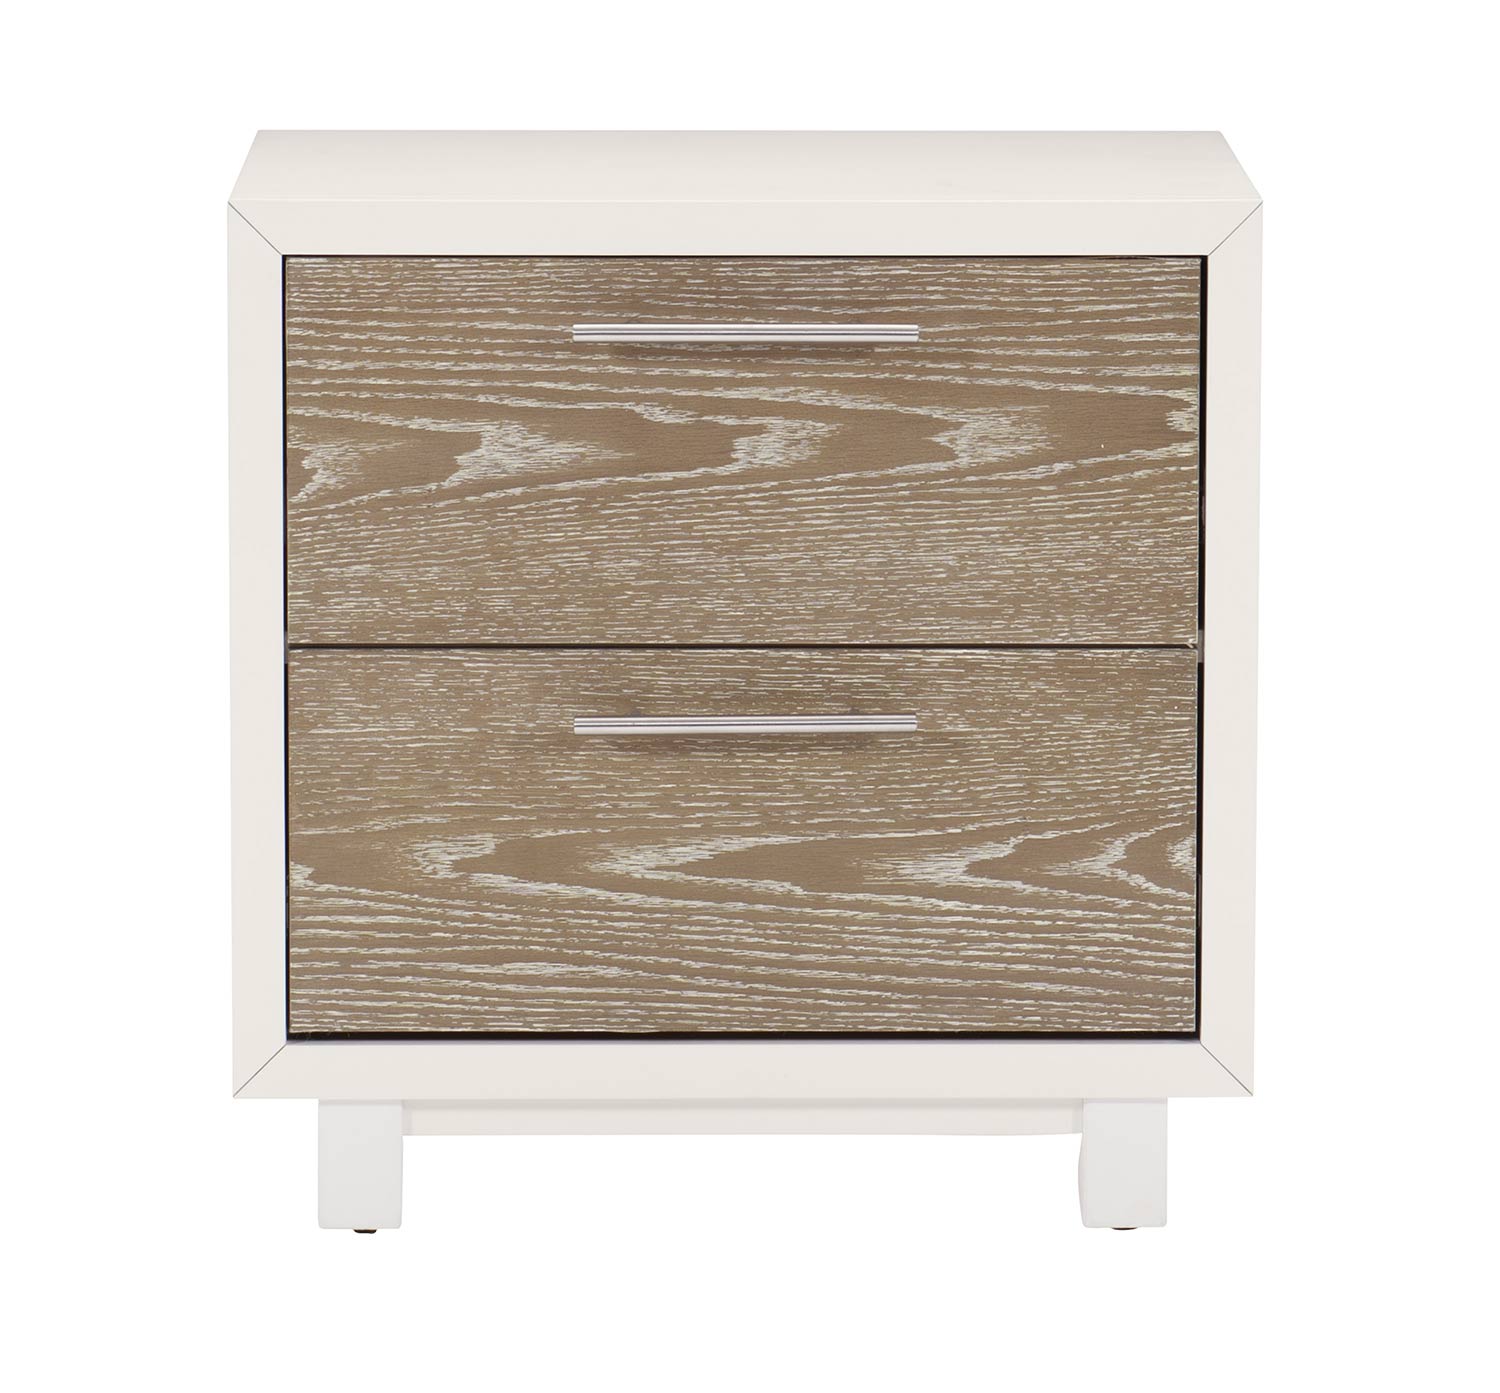 Homelegance Renly Night Stand - Natural Finish of Oak Veneer with White Framing